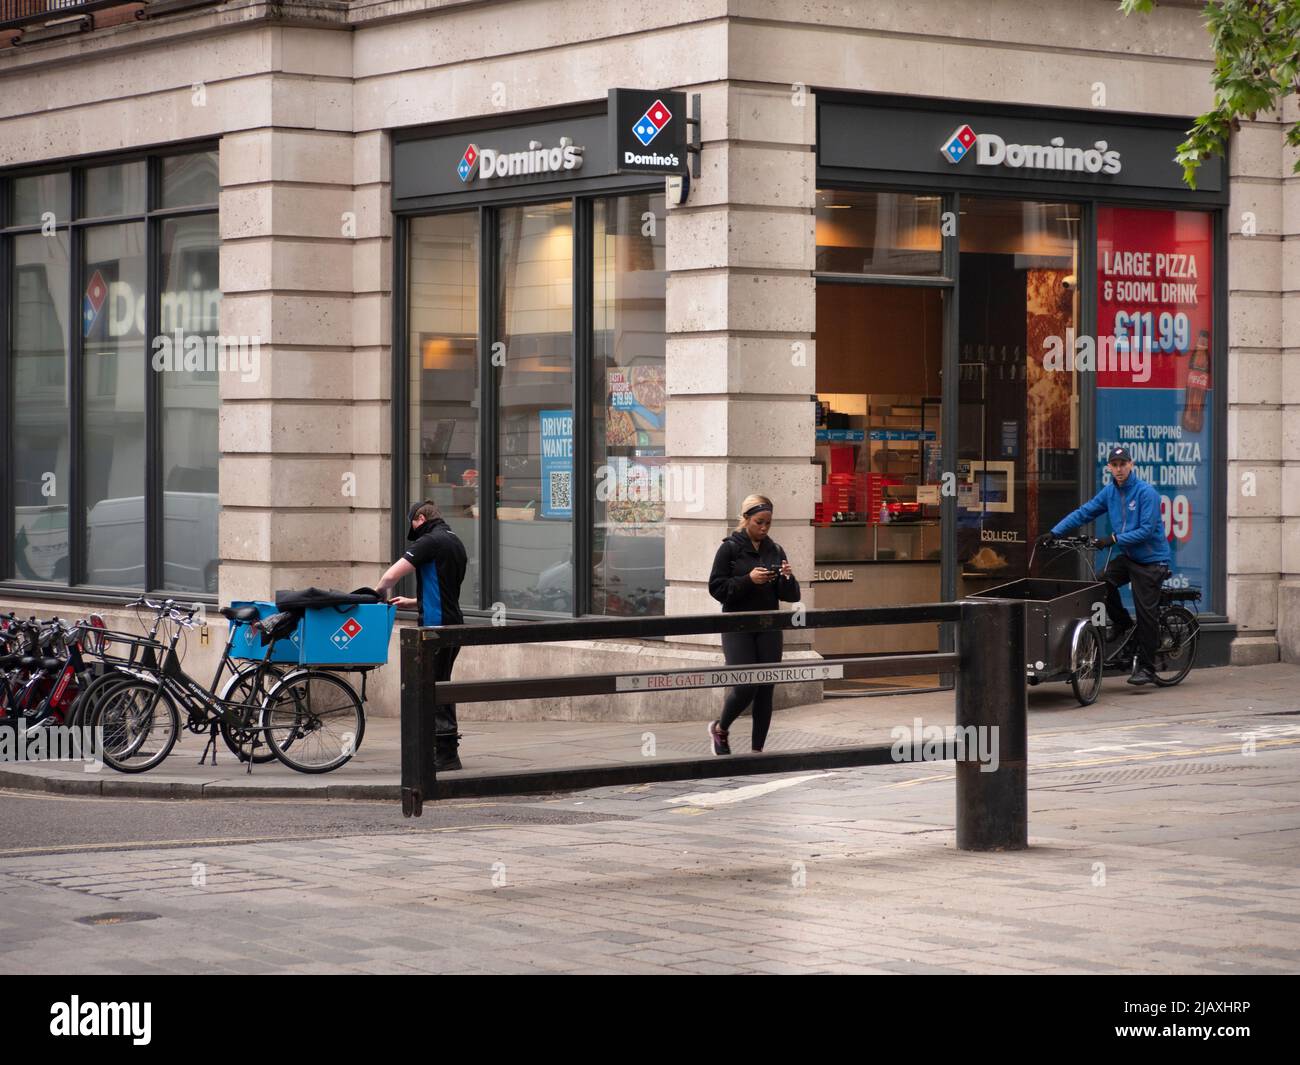 Domino's Pizza outlet in Central London Stock Photo